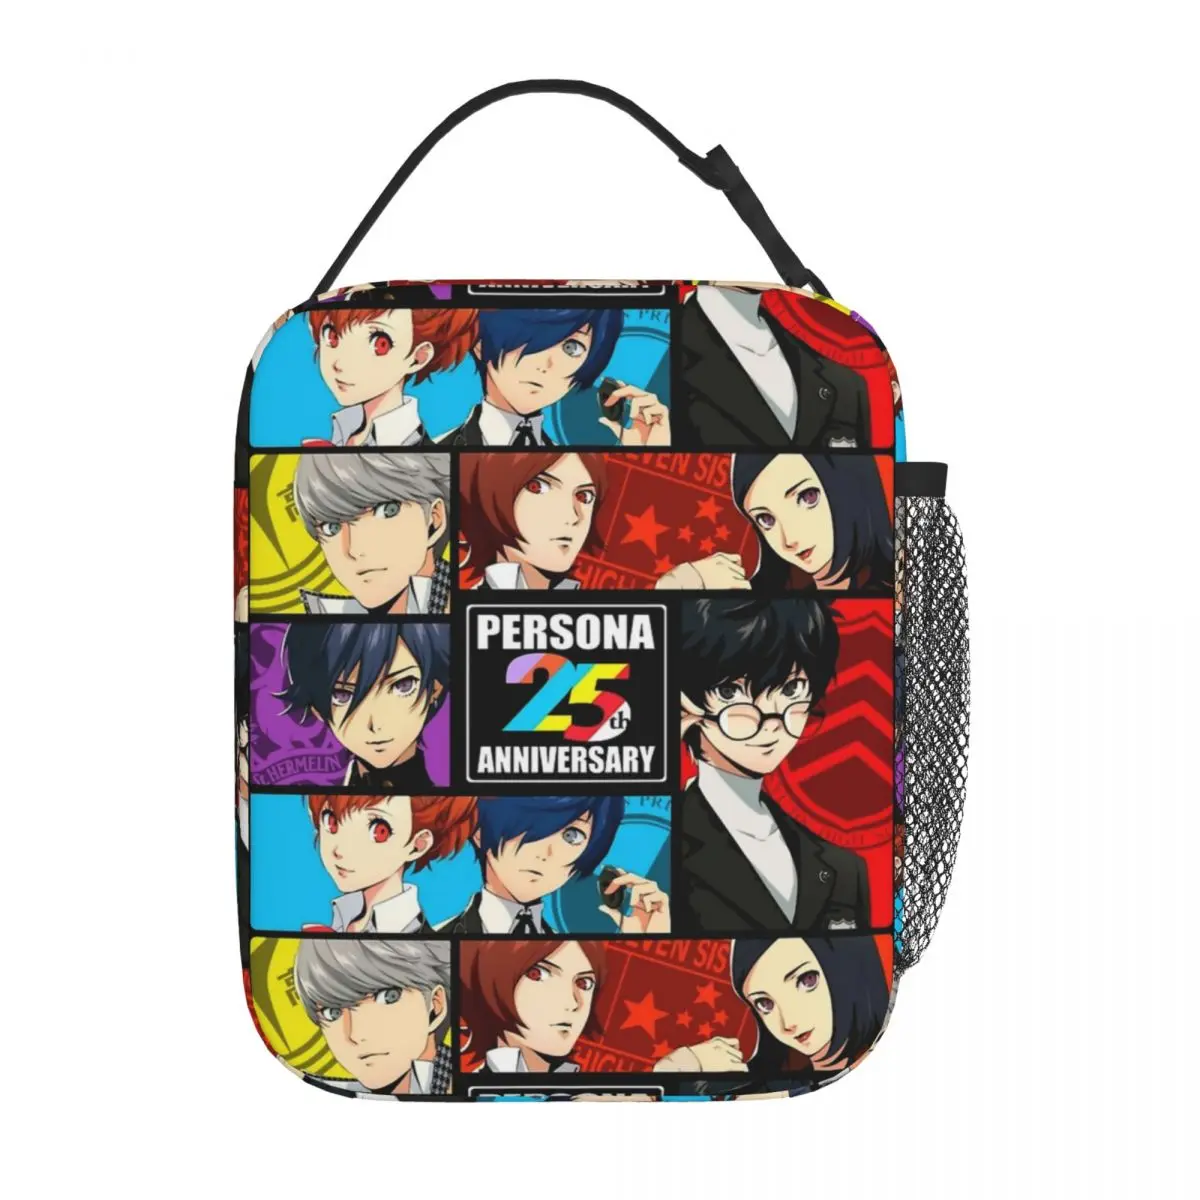 

Persona Anniversary Game Fans Lover Insulated Lunch Bags gamer Food Container Bags Reusable Cooler Thermal Bento Box For Travel